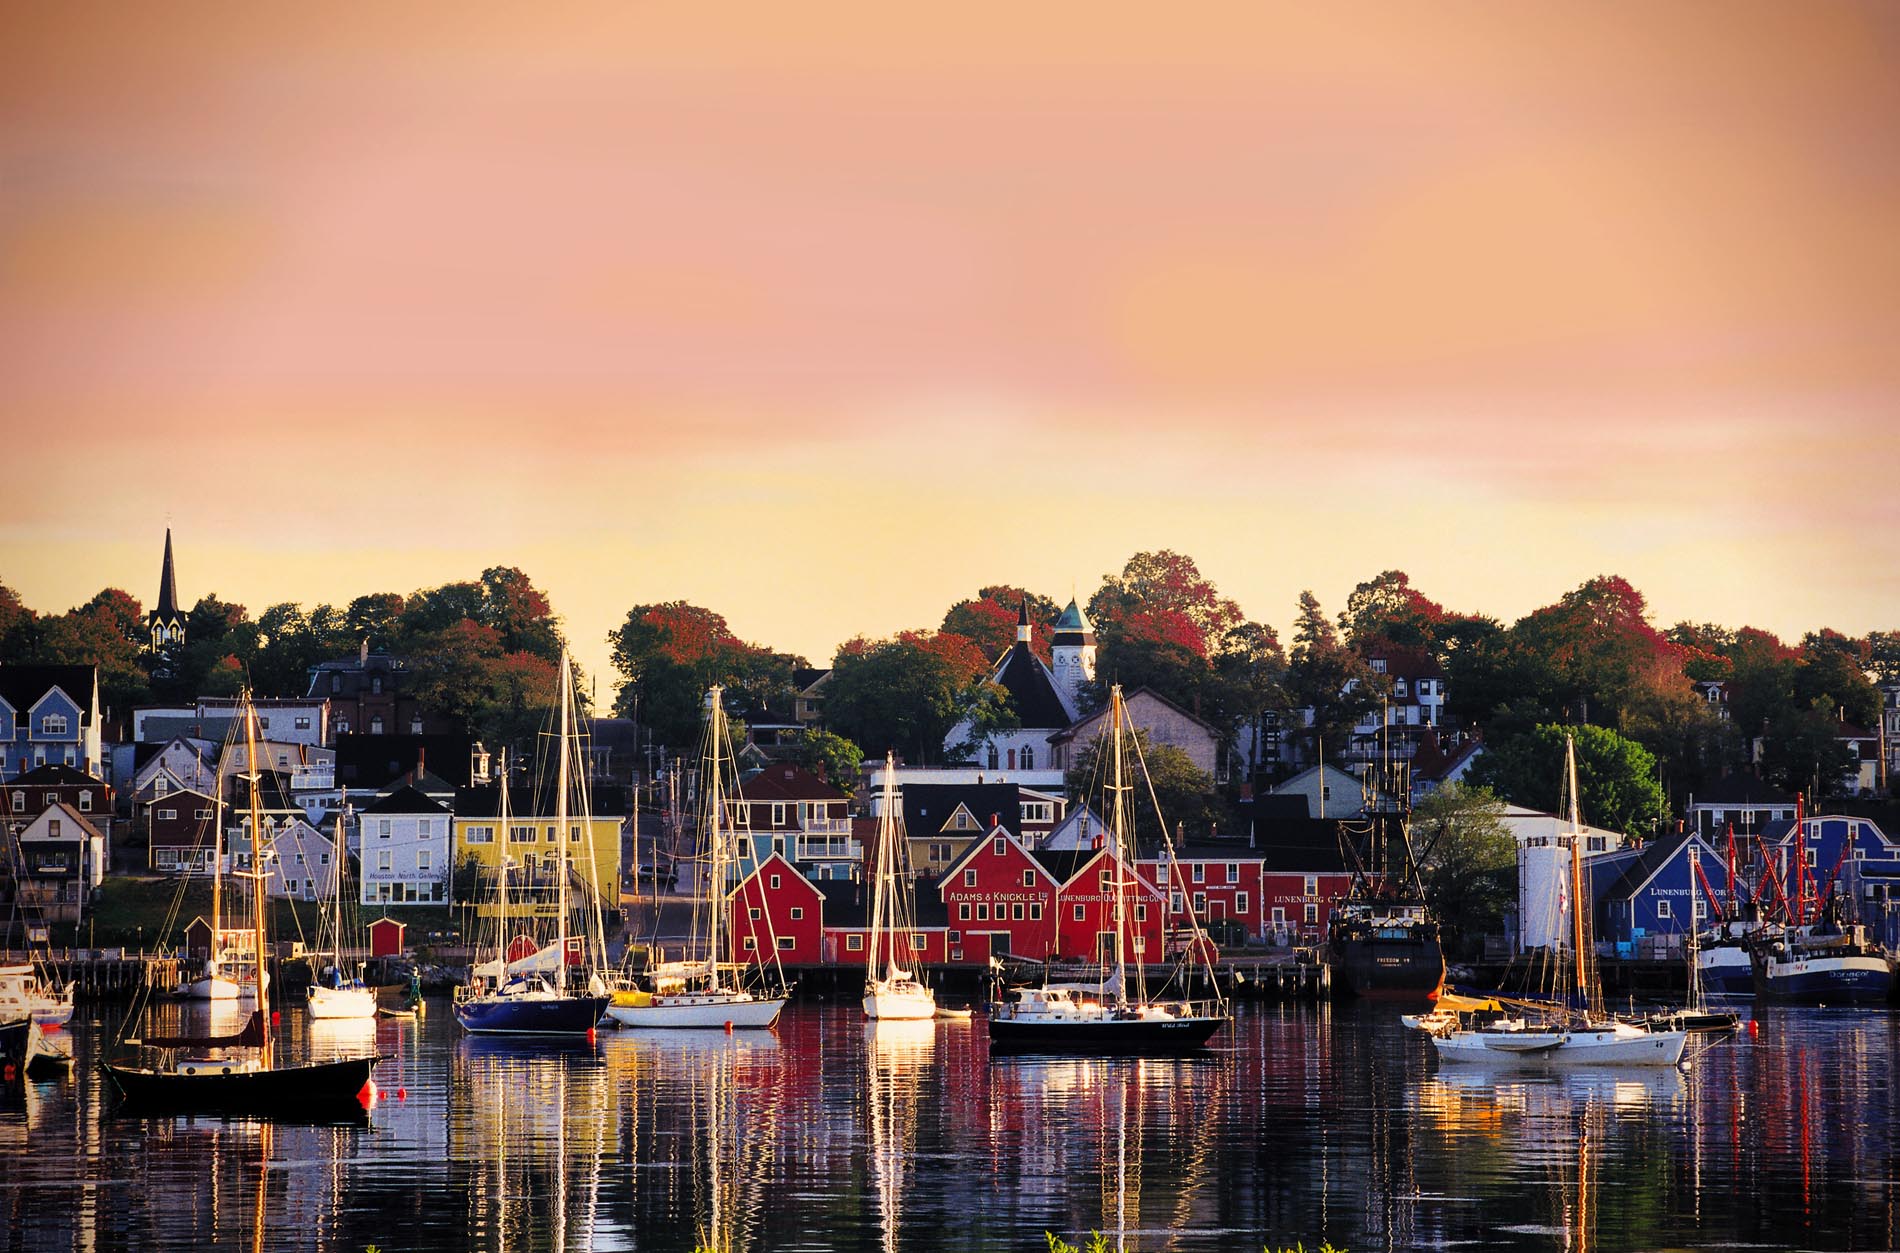 Colours abound at golden hour in Lunenburg, NS - image by Tourism NS